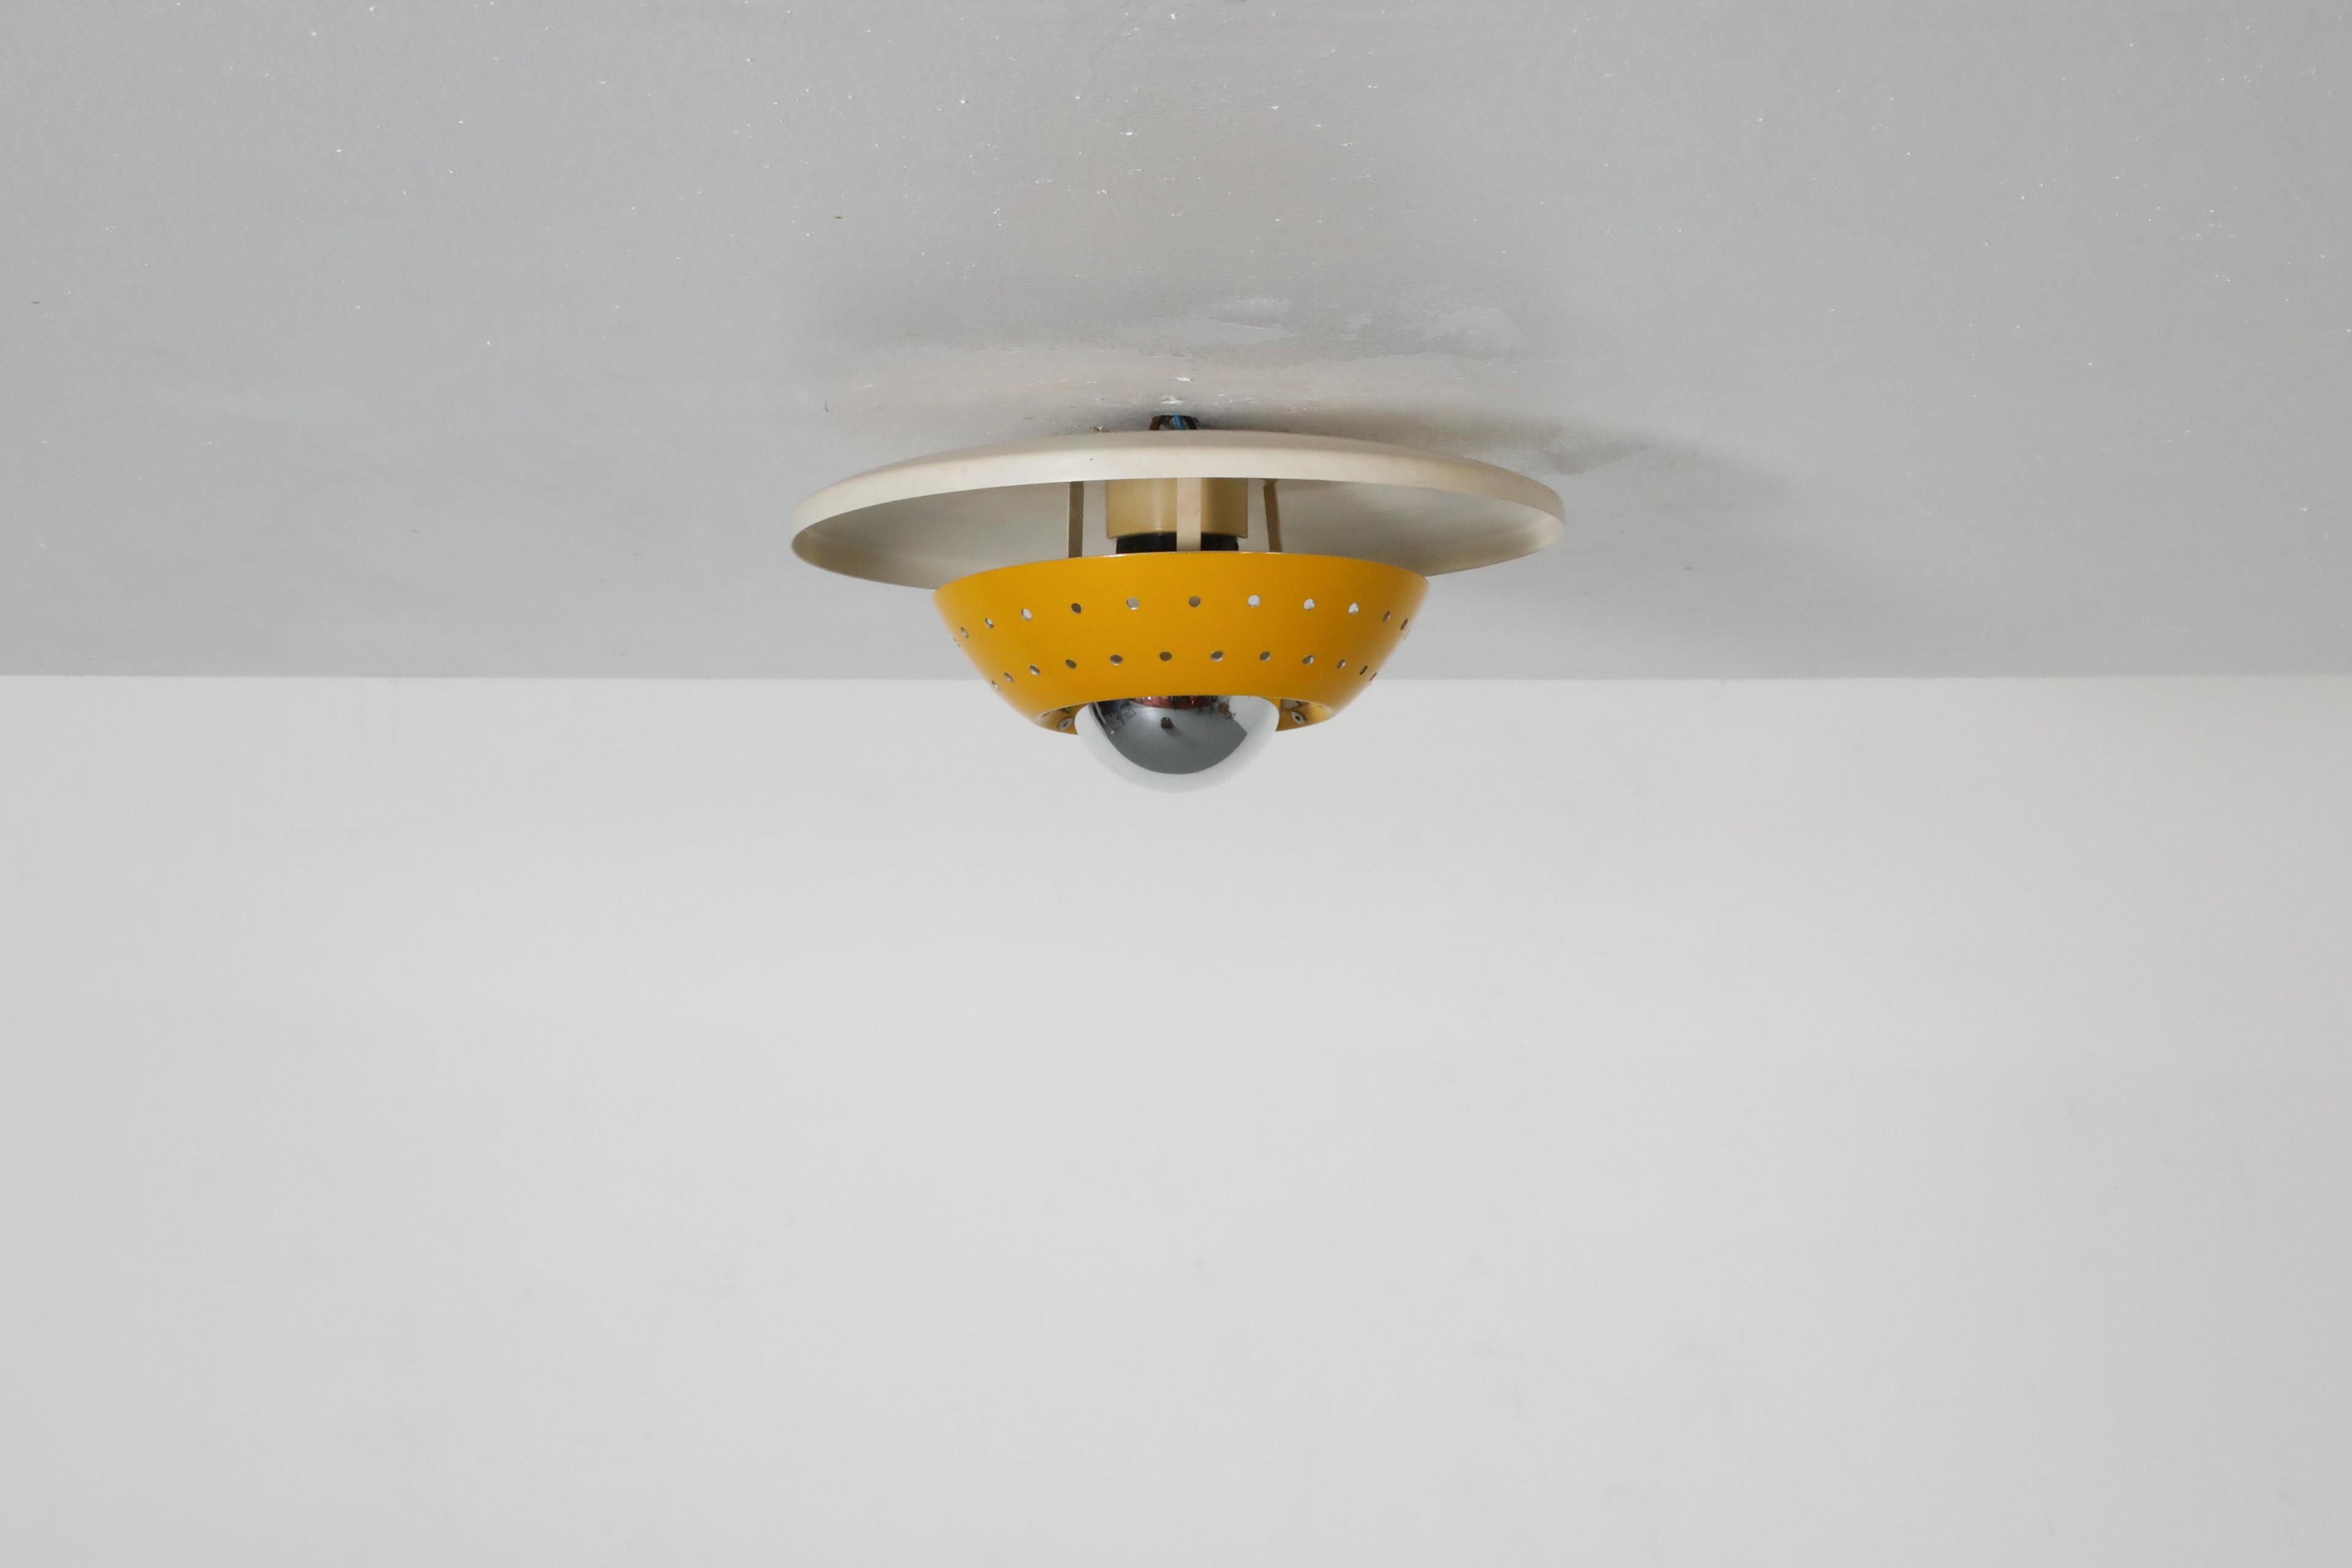 Dutch Mid-Century, UFO-styled ceiling lamp attributed to designer Louis Kalff for renowned electronics and lighting manufacturer Philips, Netherlands. Stylishly designed with a white enameled metal dome base and a contrasting yellow enameled